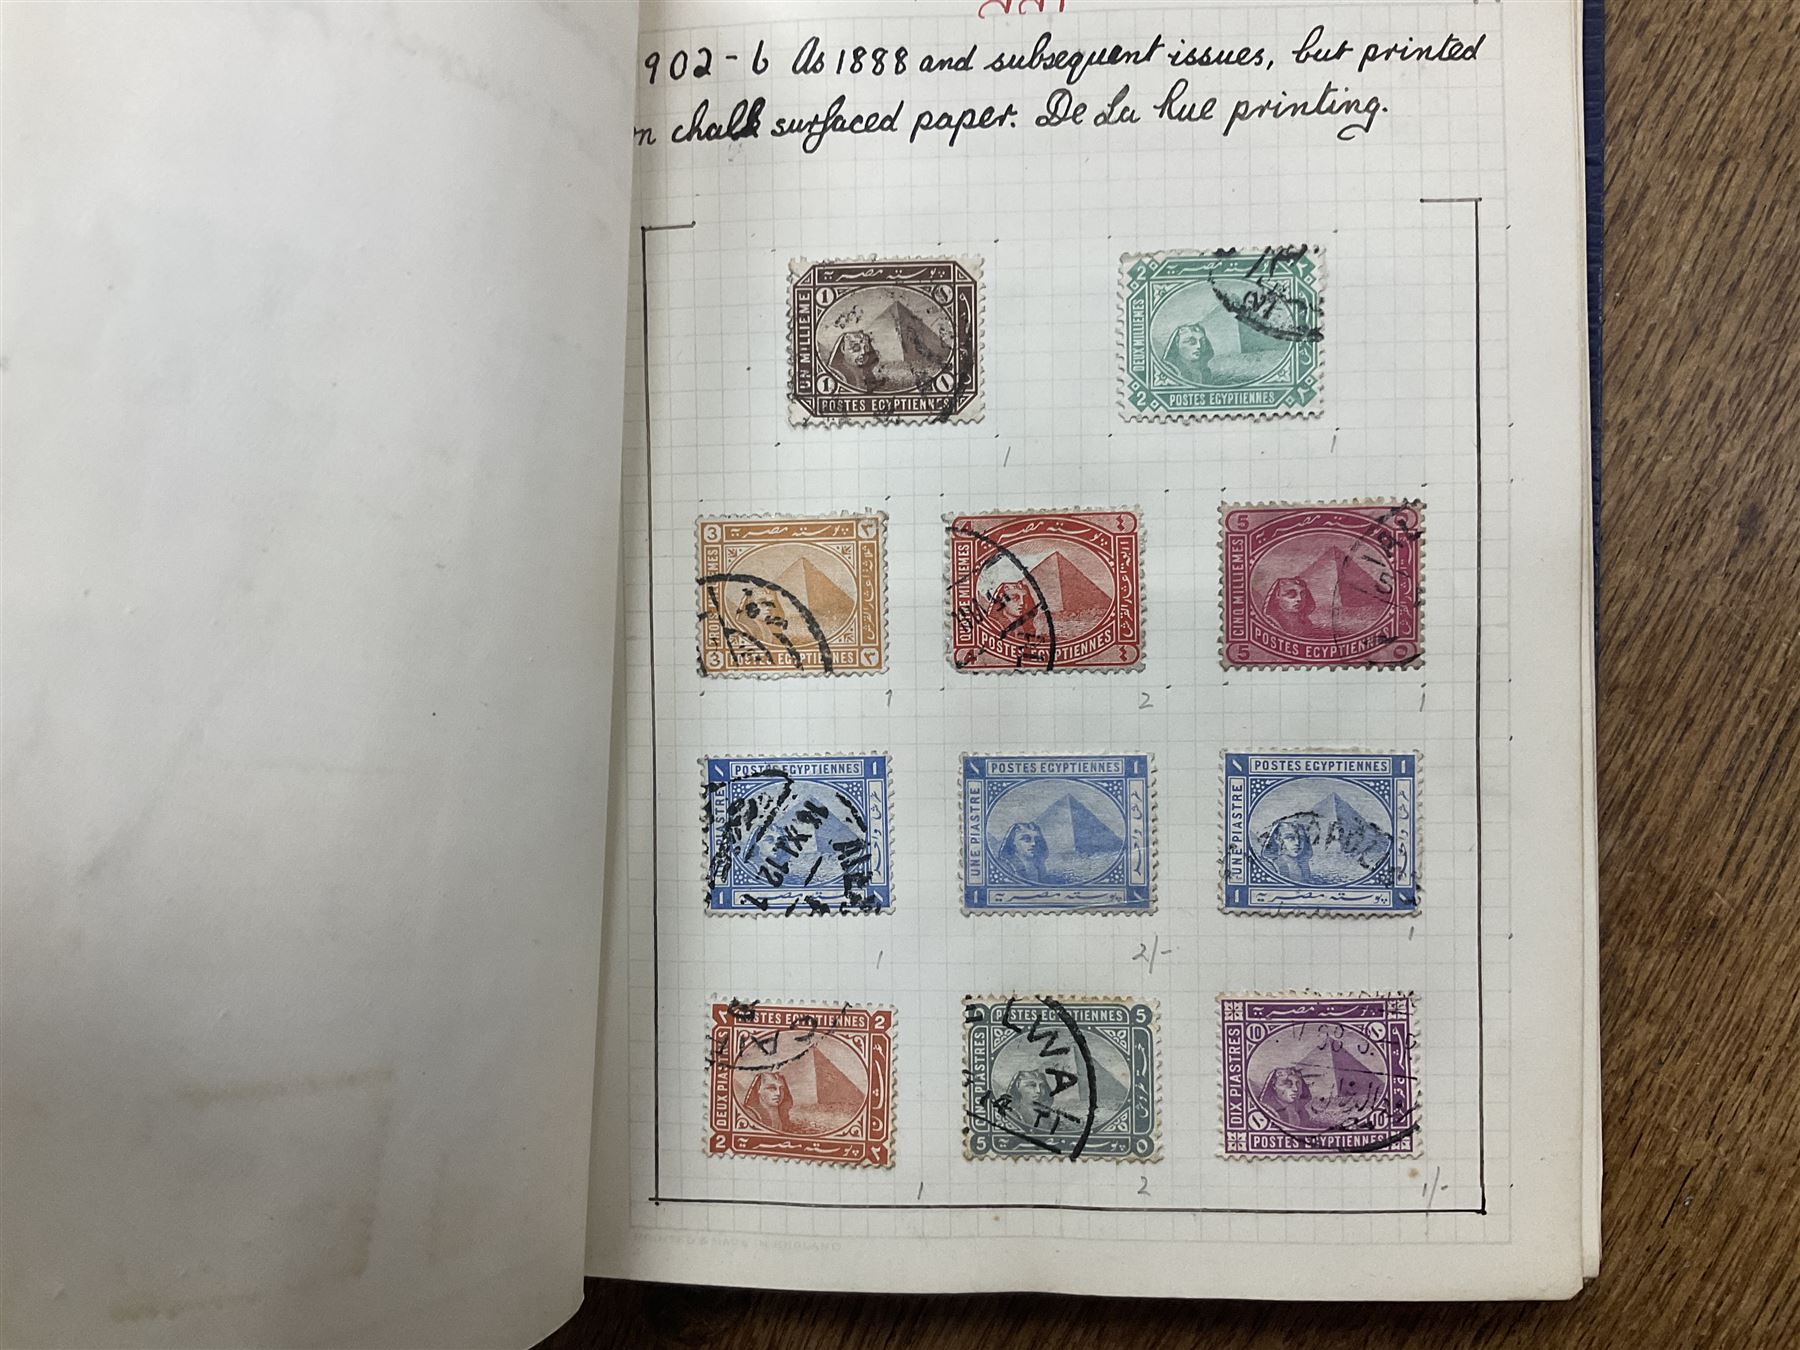 Egypt 1866 and later stamps - Image 361 of 761